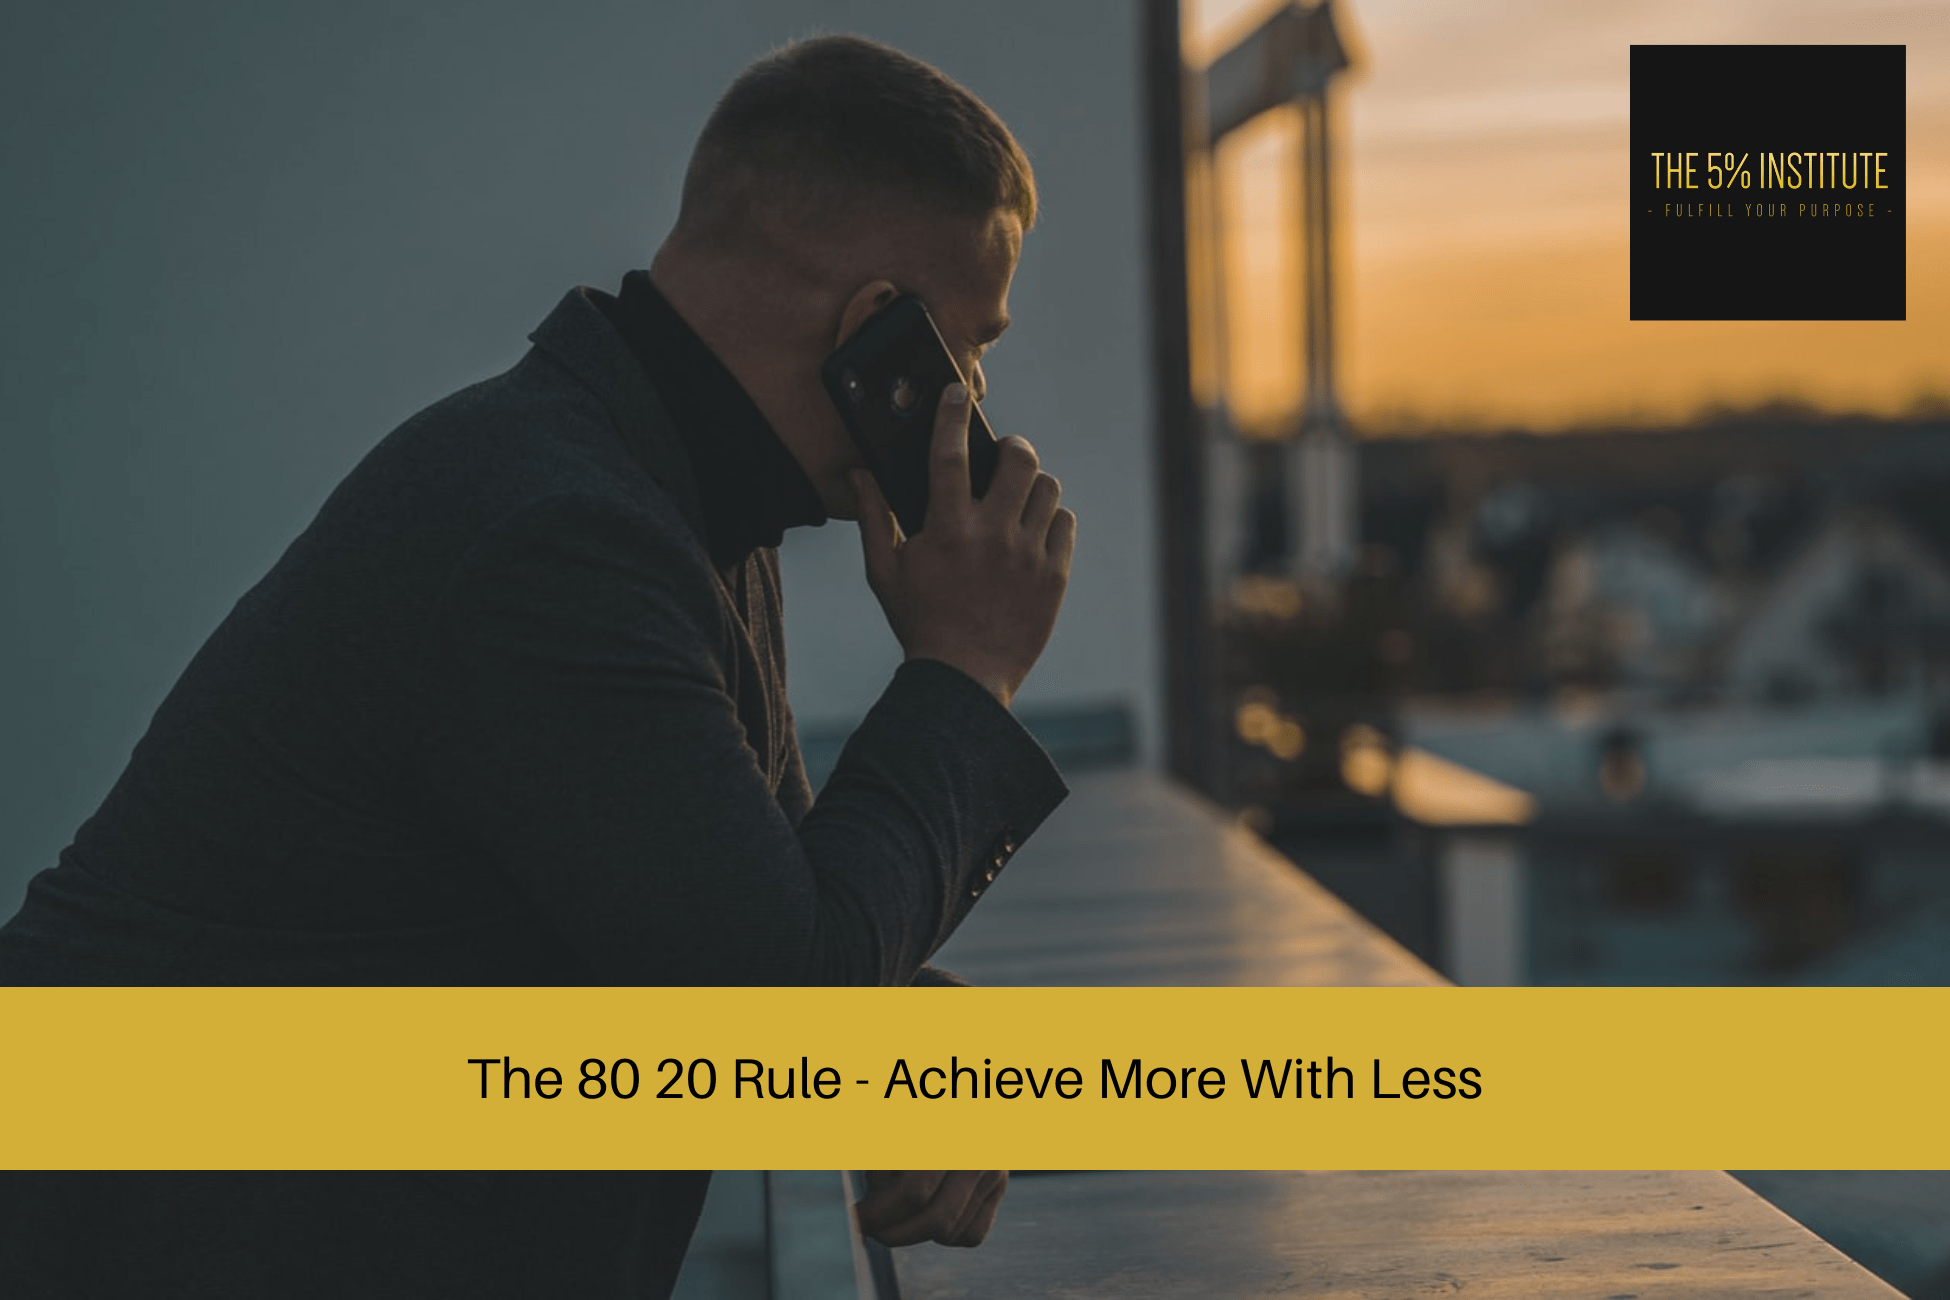 The 80 20 Rule - Achieve More With Less